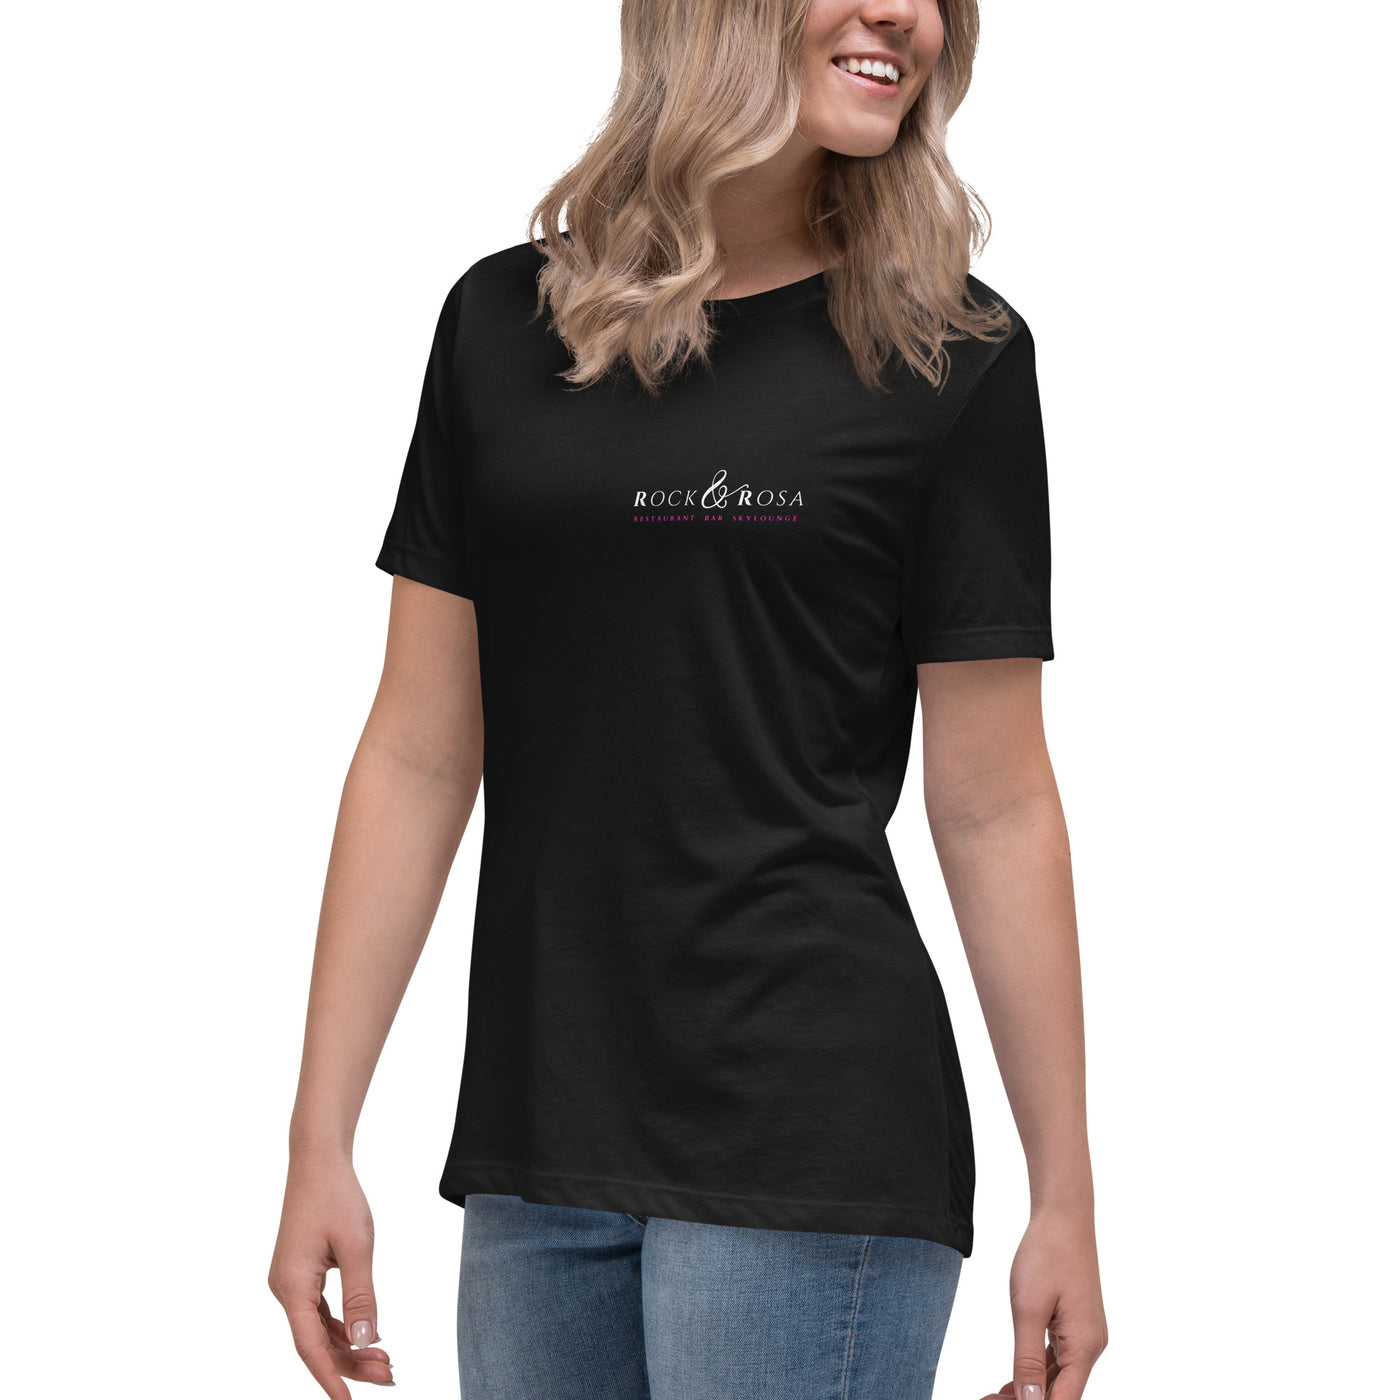 Get trendy with Women's Relaxed T-Shirt -  available at SWCH Store. Grab yours for £14.50 today!